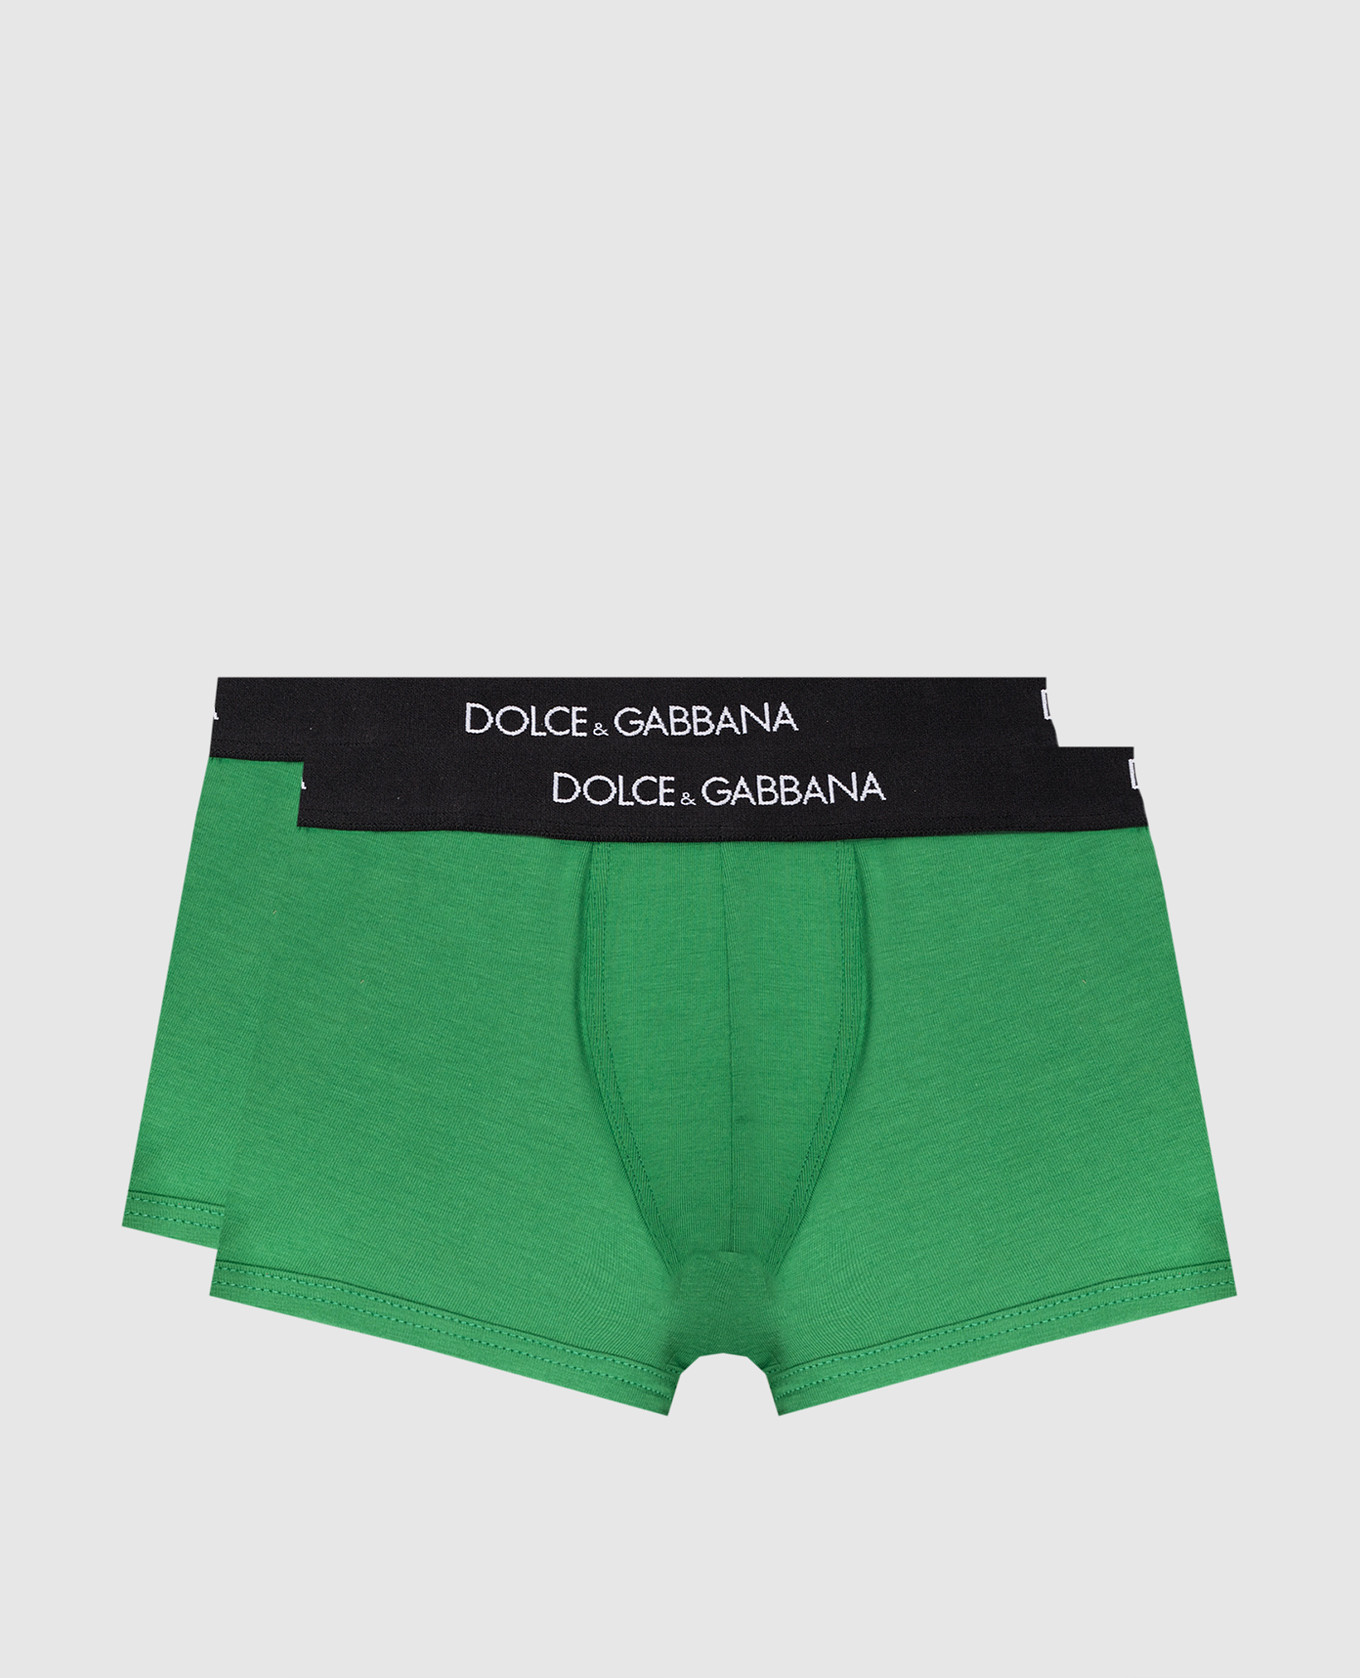 Green boxer briefs with a logo pattern